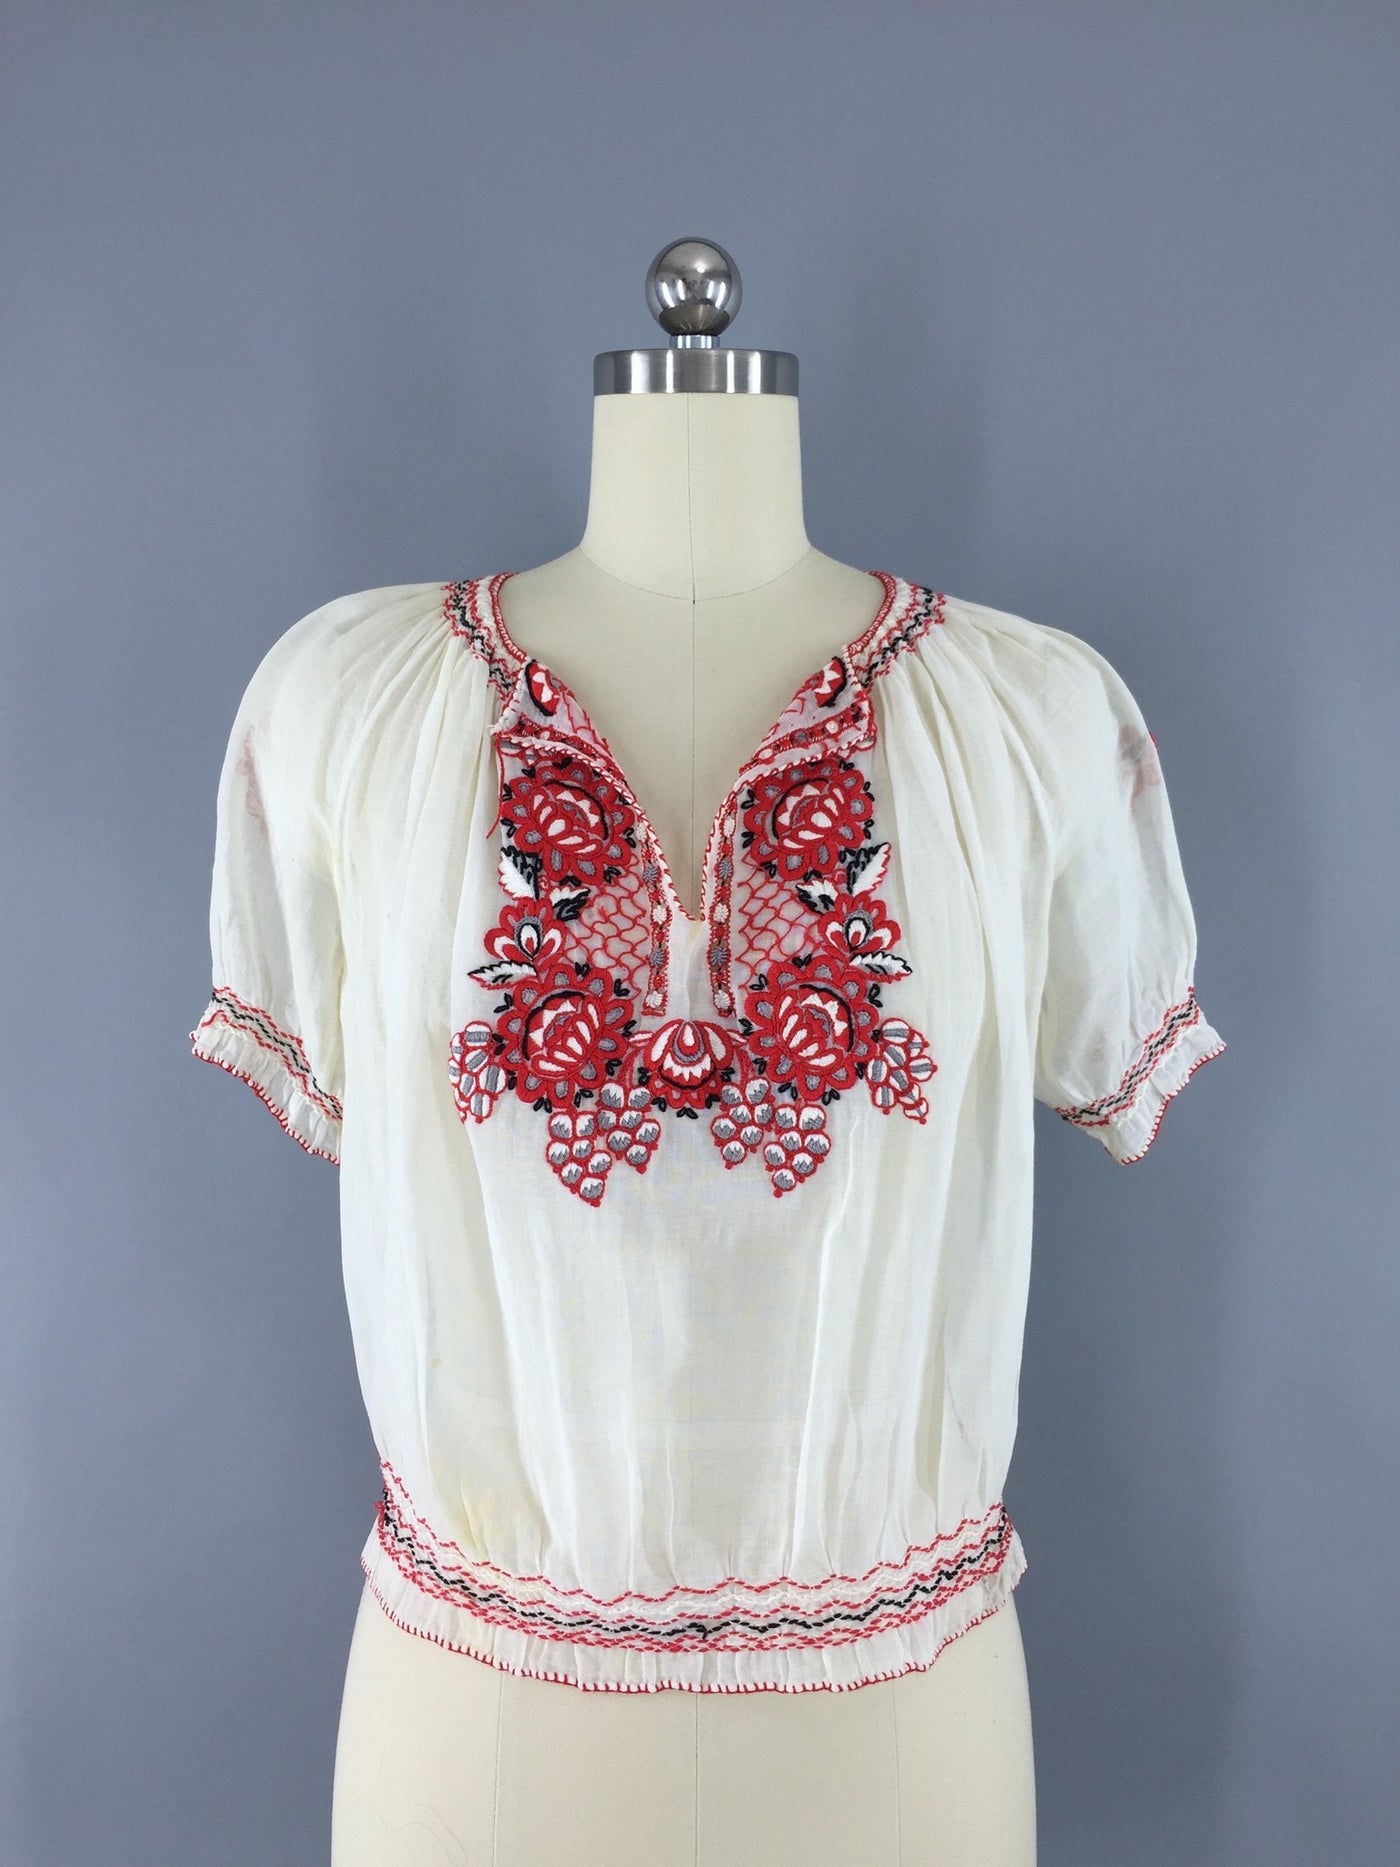 Vintage 1930s Peasant Blouse / Hungarian Embroidered - ThisBlueBird